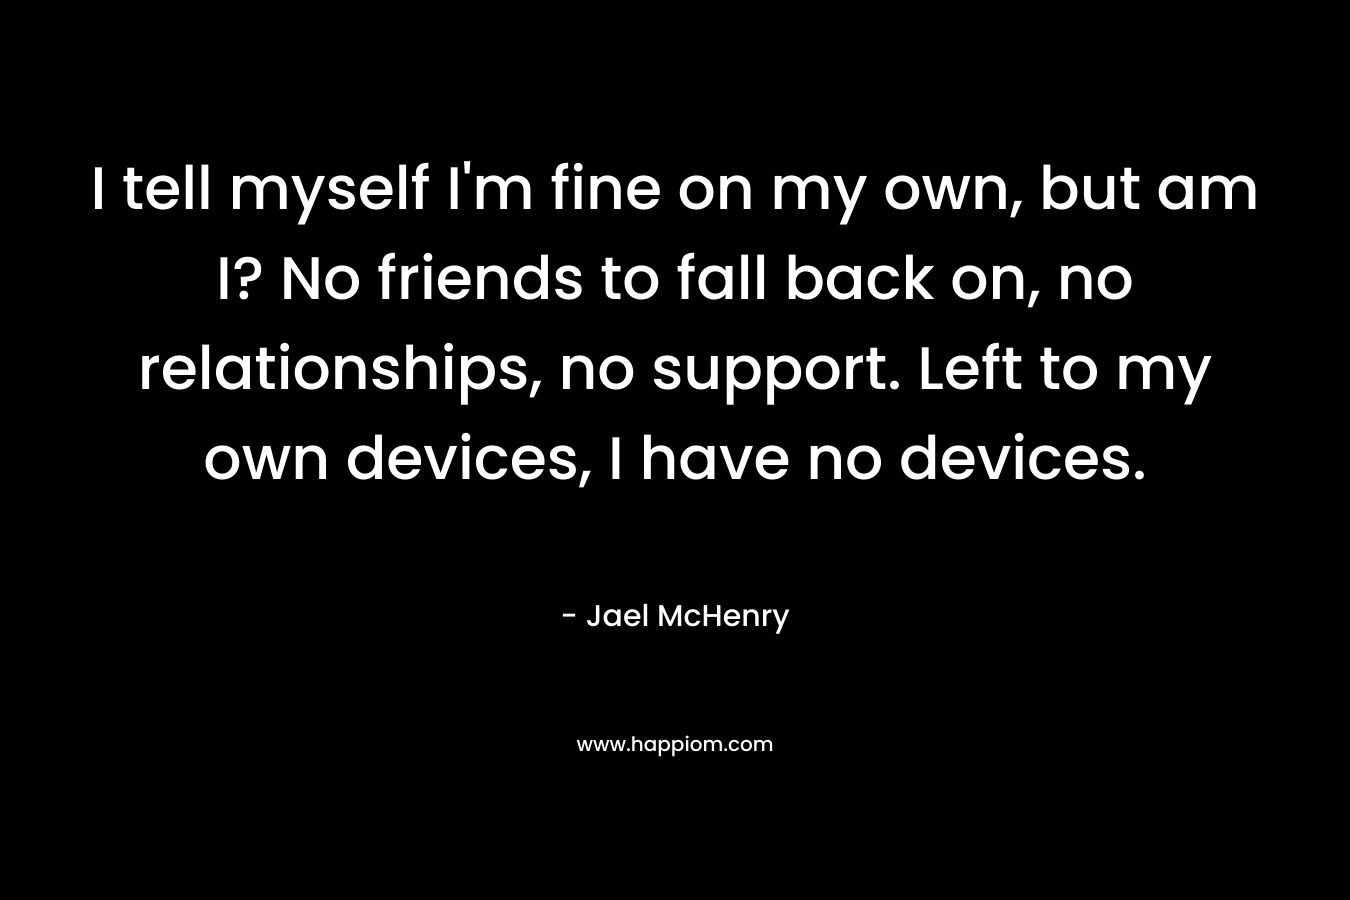 I tell myself I'm fine on my own, but am I? No friends to fall back on, no relationships, no support. Left to my own devices, I have no devices.